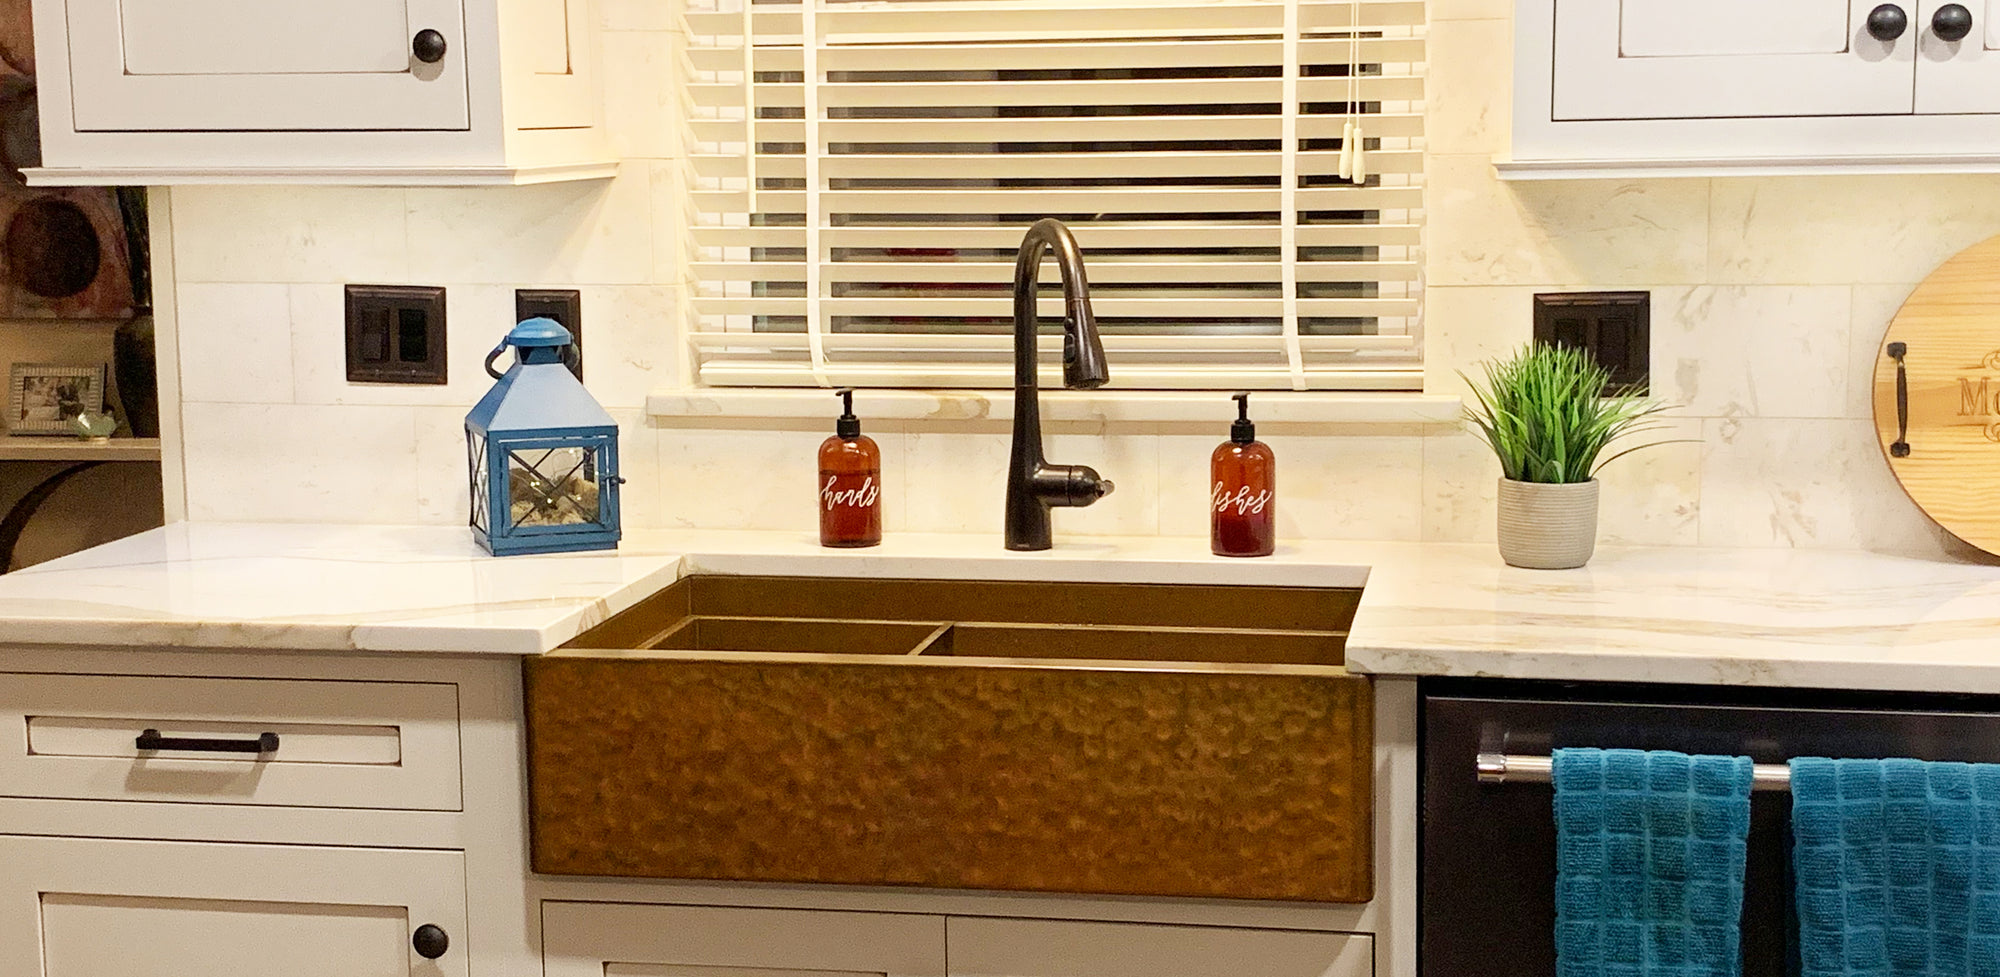 Hammered Copper Farmhouse Sink - USA Made from 14 gauge pure copper - American Made product